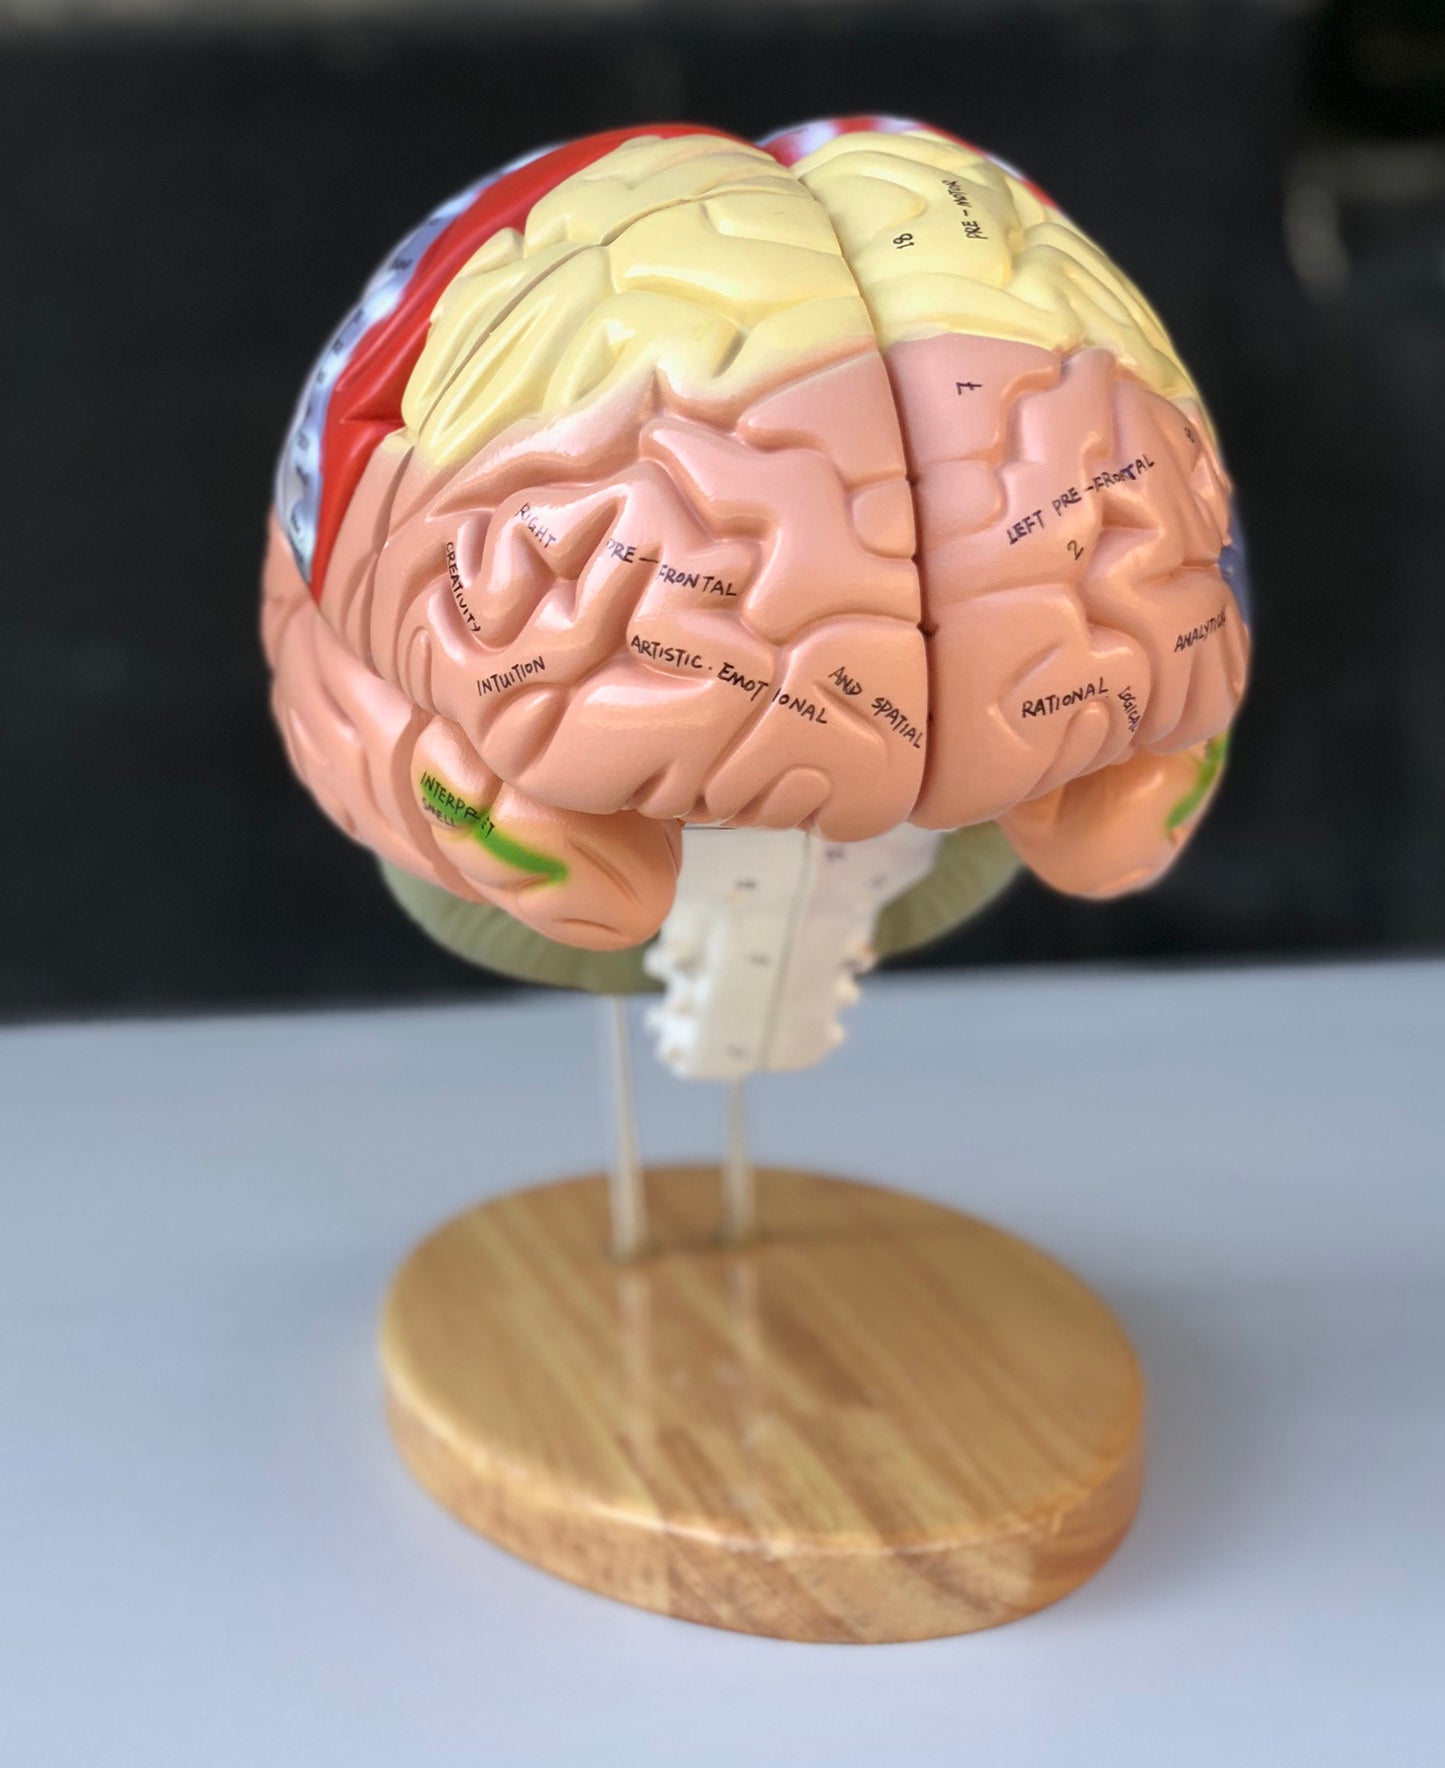 Enlarged brain model with many areas in educational colors. Can be separated into 4 parts